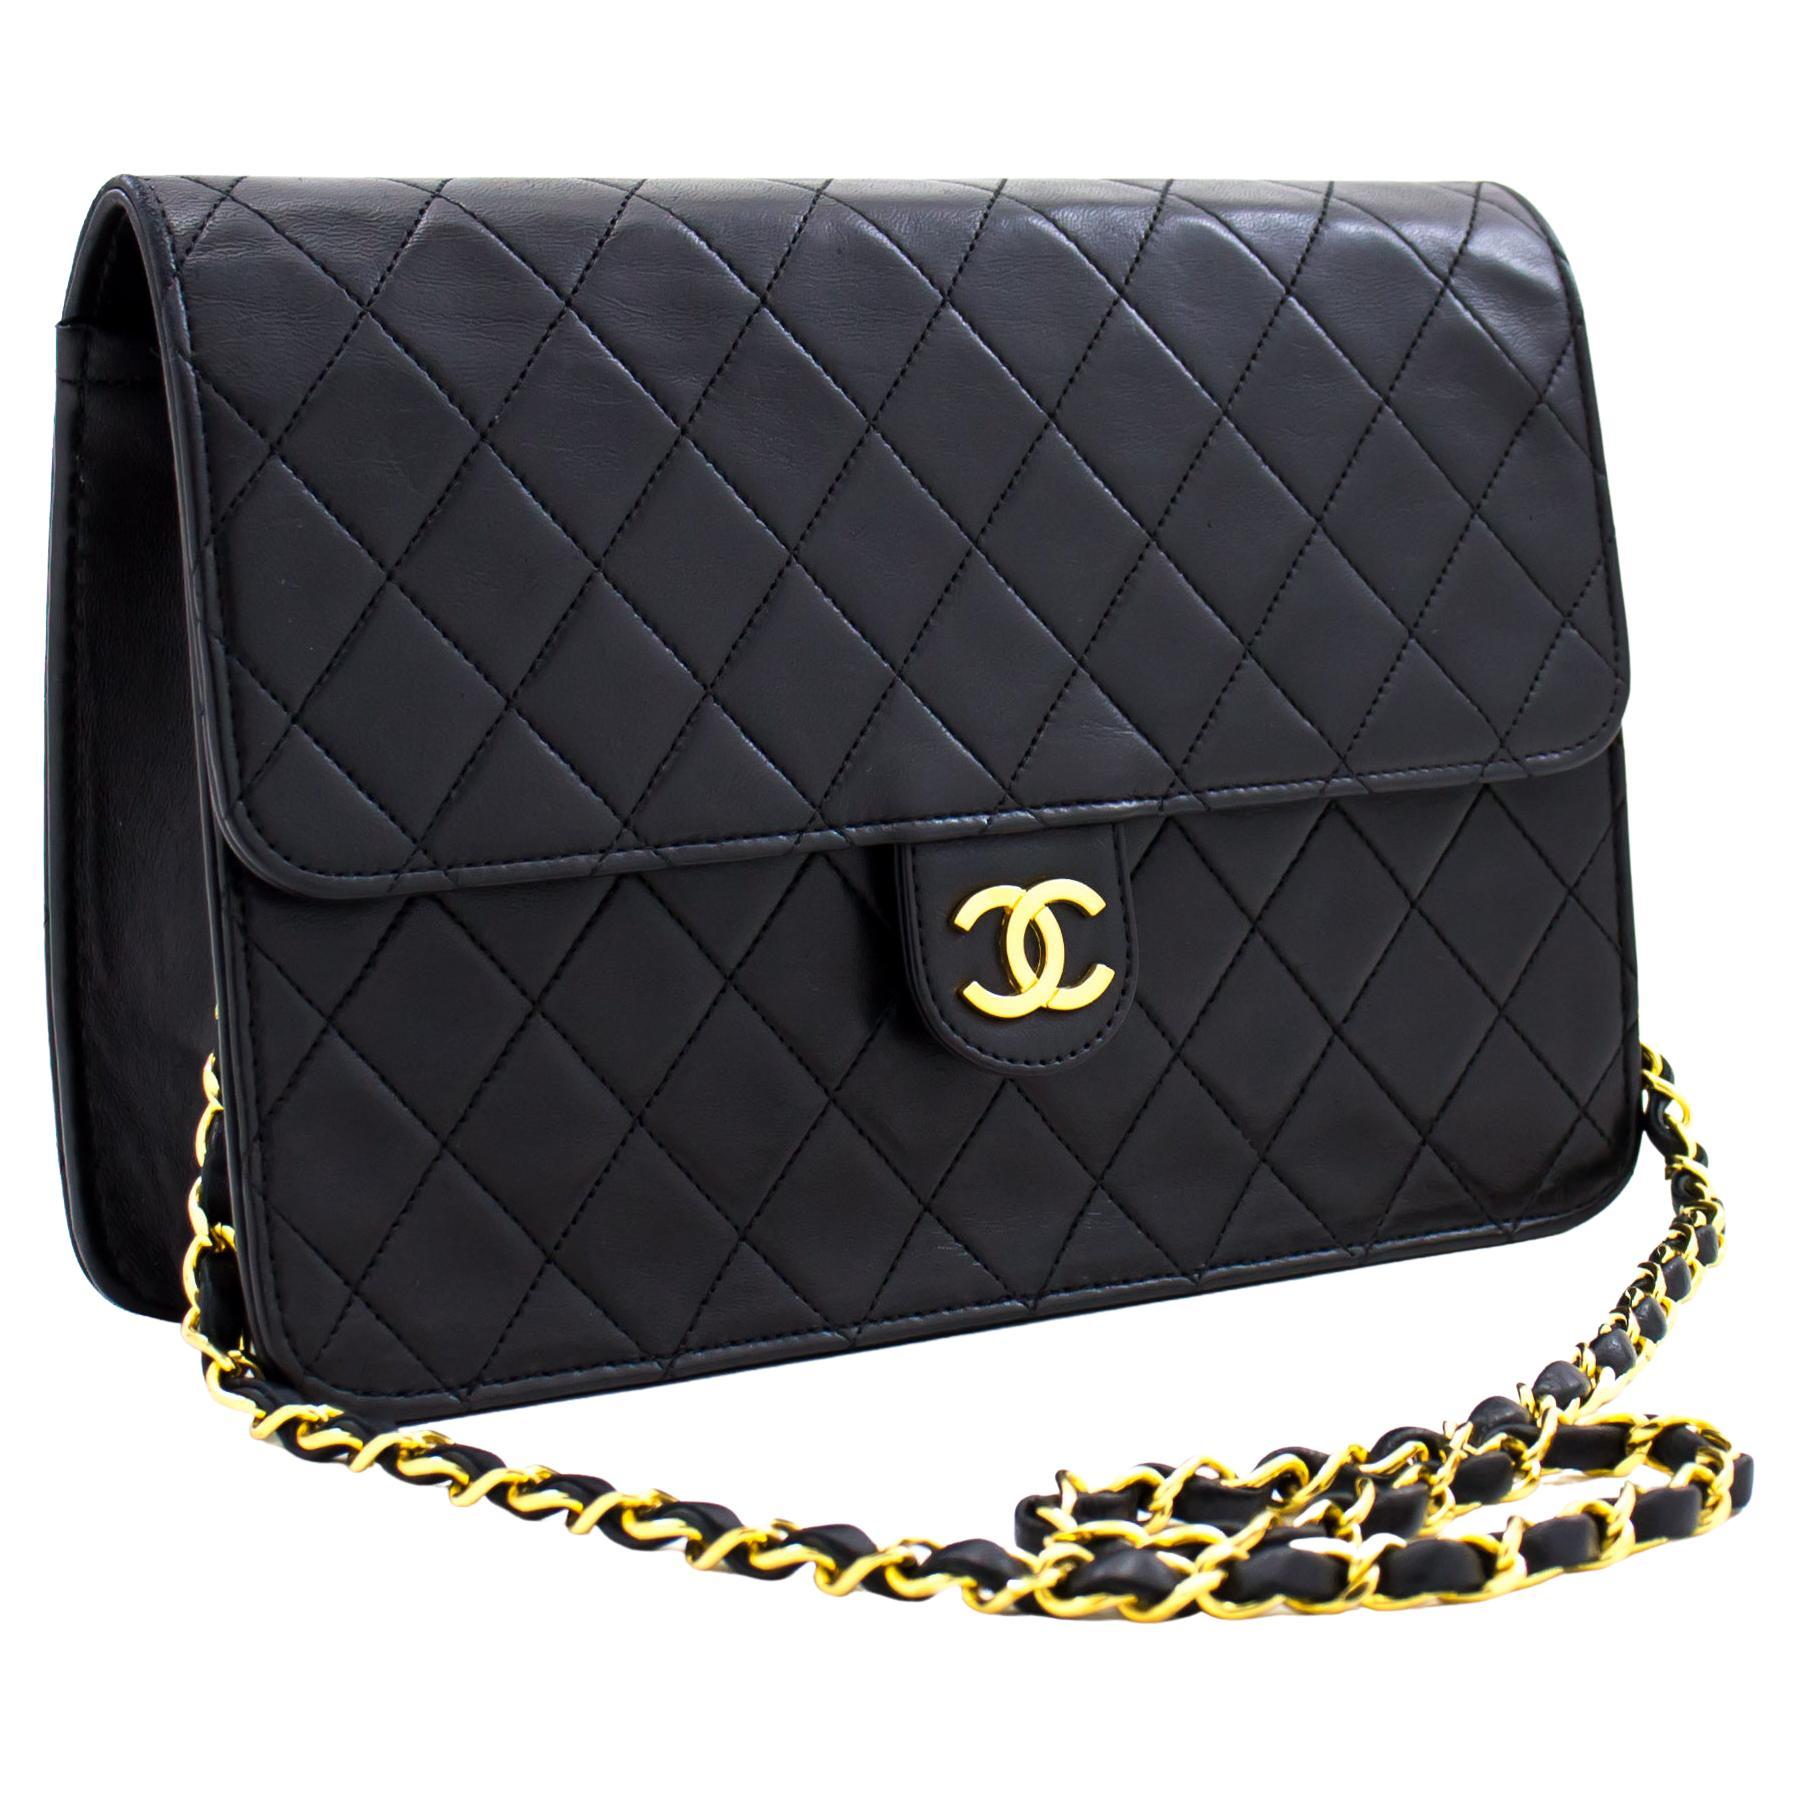 CHANEL Chain Shoulder Bag Black Clutch Flap Quilted Purse Lambskin